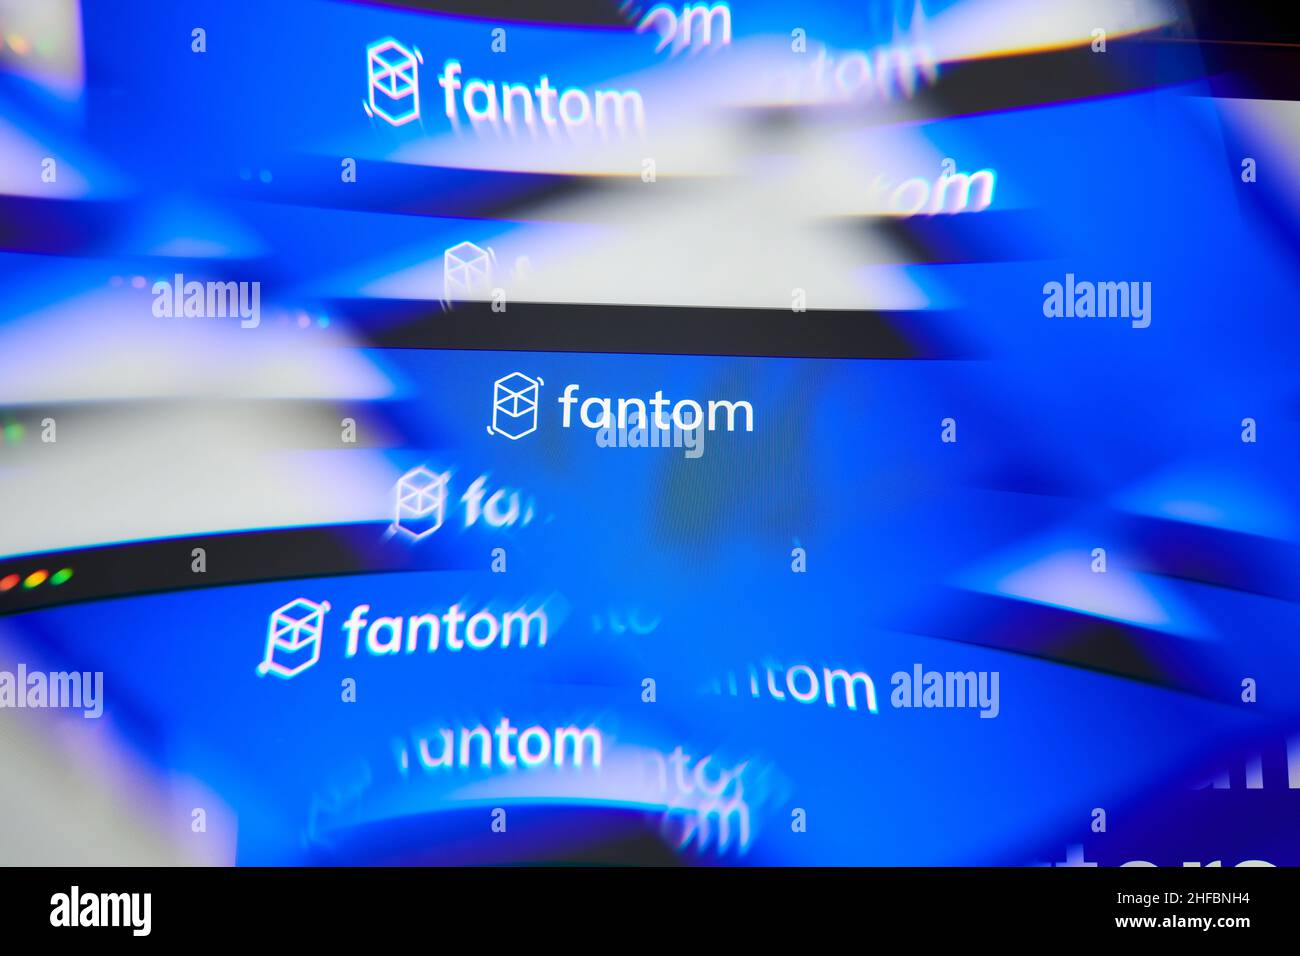 Milan, Italy - January 11, 2022: fantom - FTM logo on laptop screen seen through an optical prism. Dynamic and unique image form fantom, FTM coin webs Stock Photo